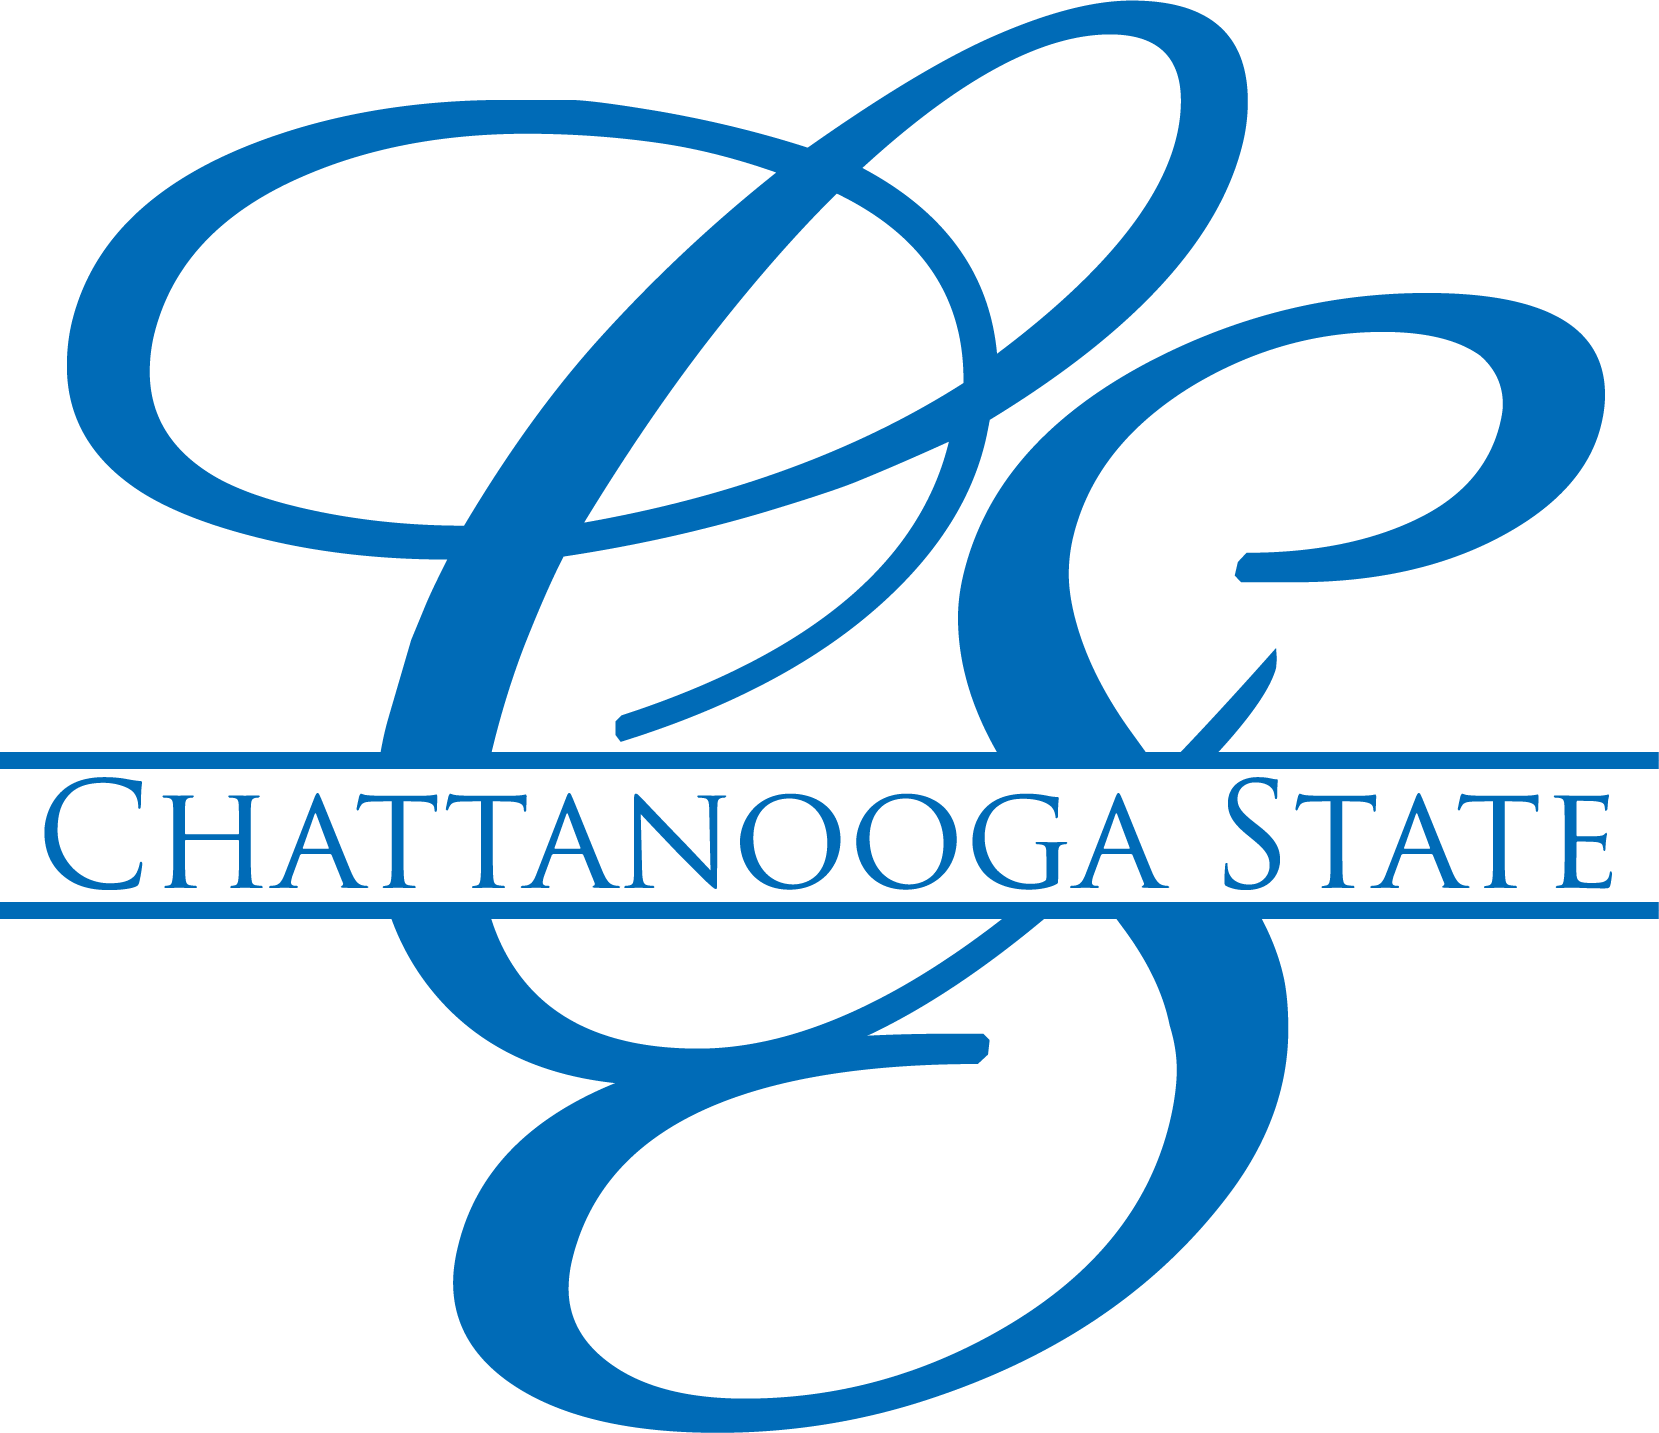 Chattanooga State